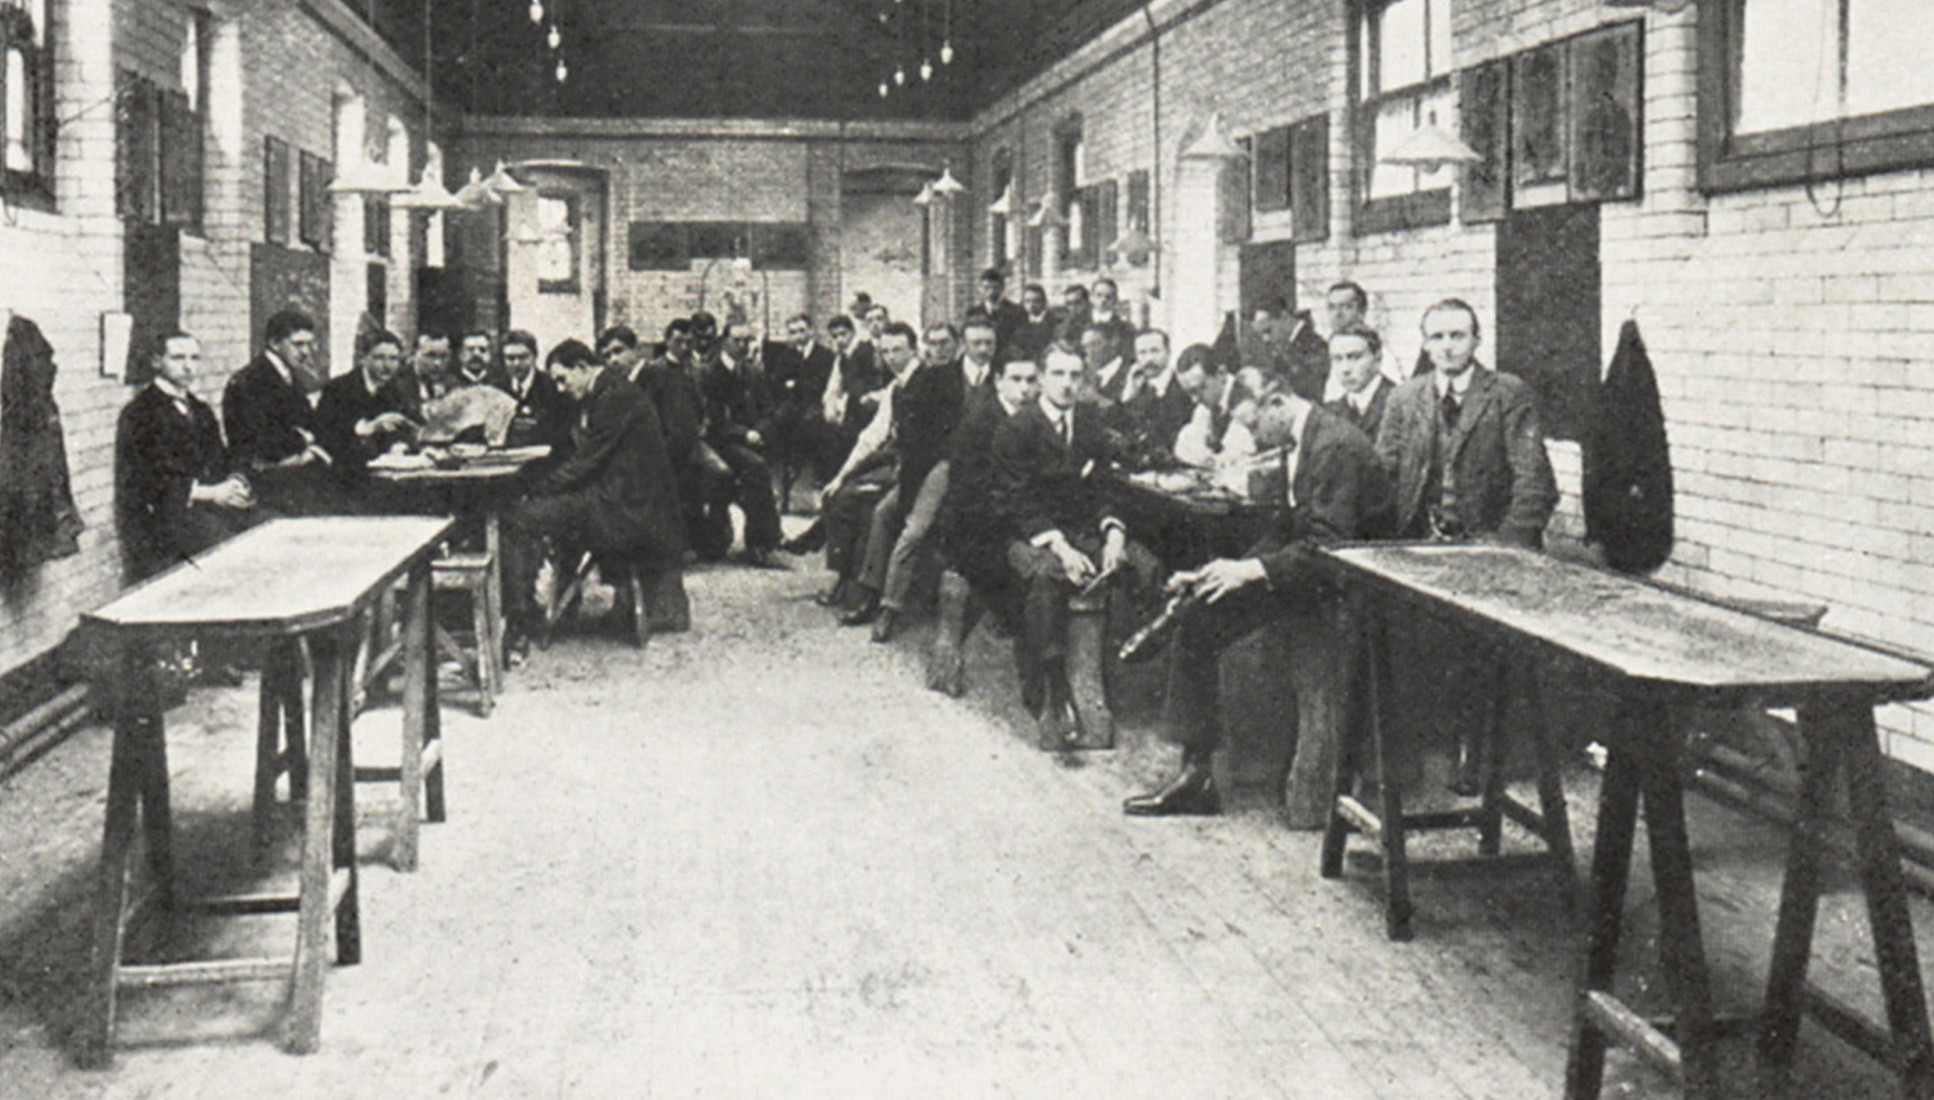 A black and white image of students sitting in a dissecting room in the early 1900s.